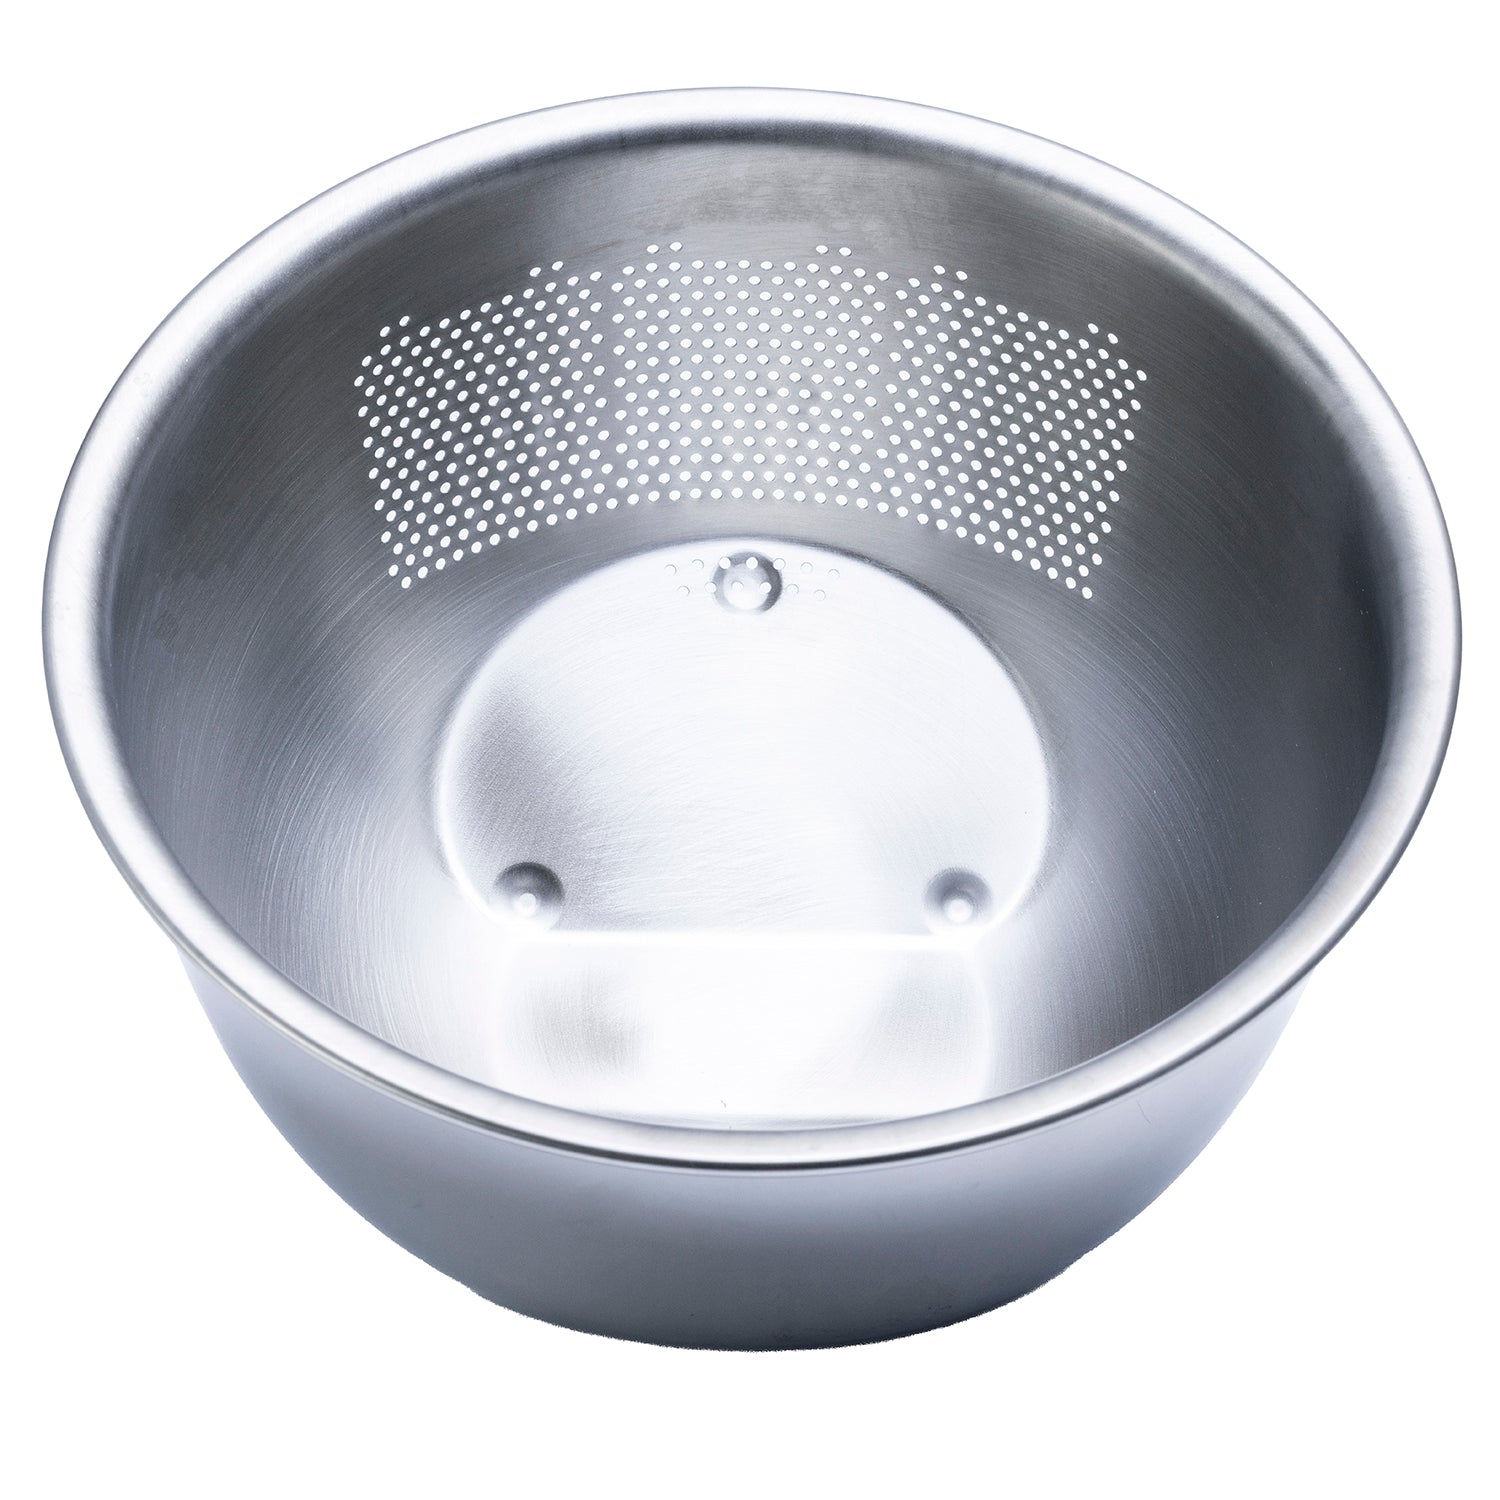 Stainless steel large colander with commercial steel handle for frying,  industrial extra large noodle spoon, filter